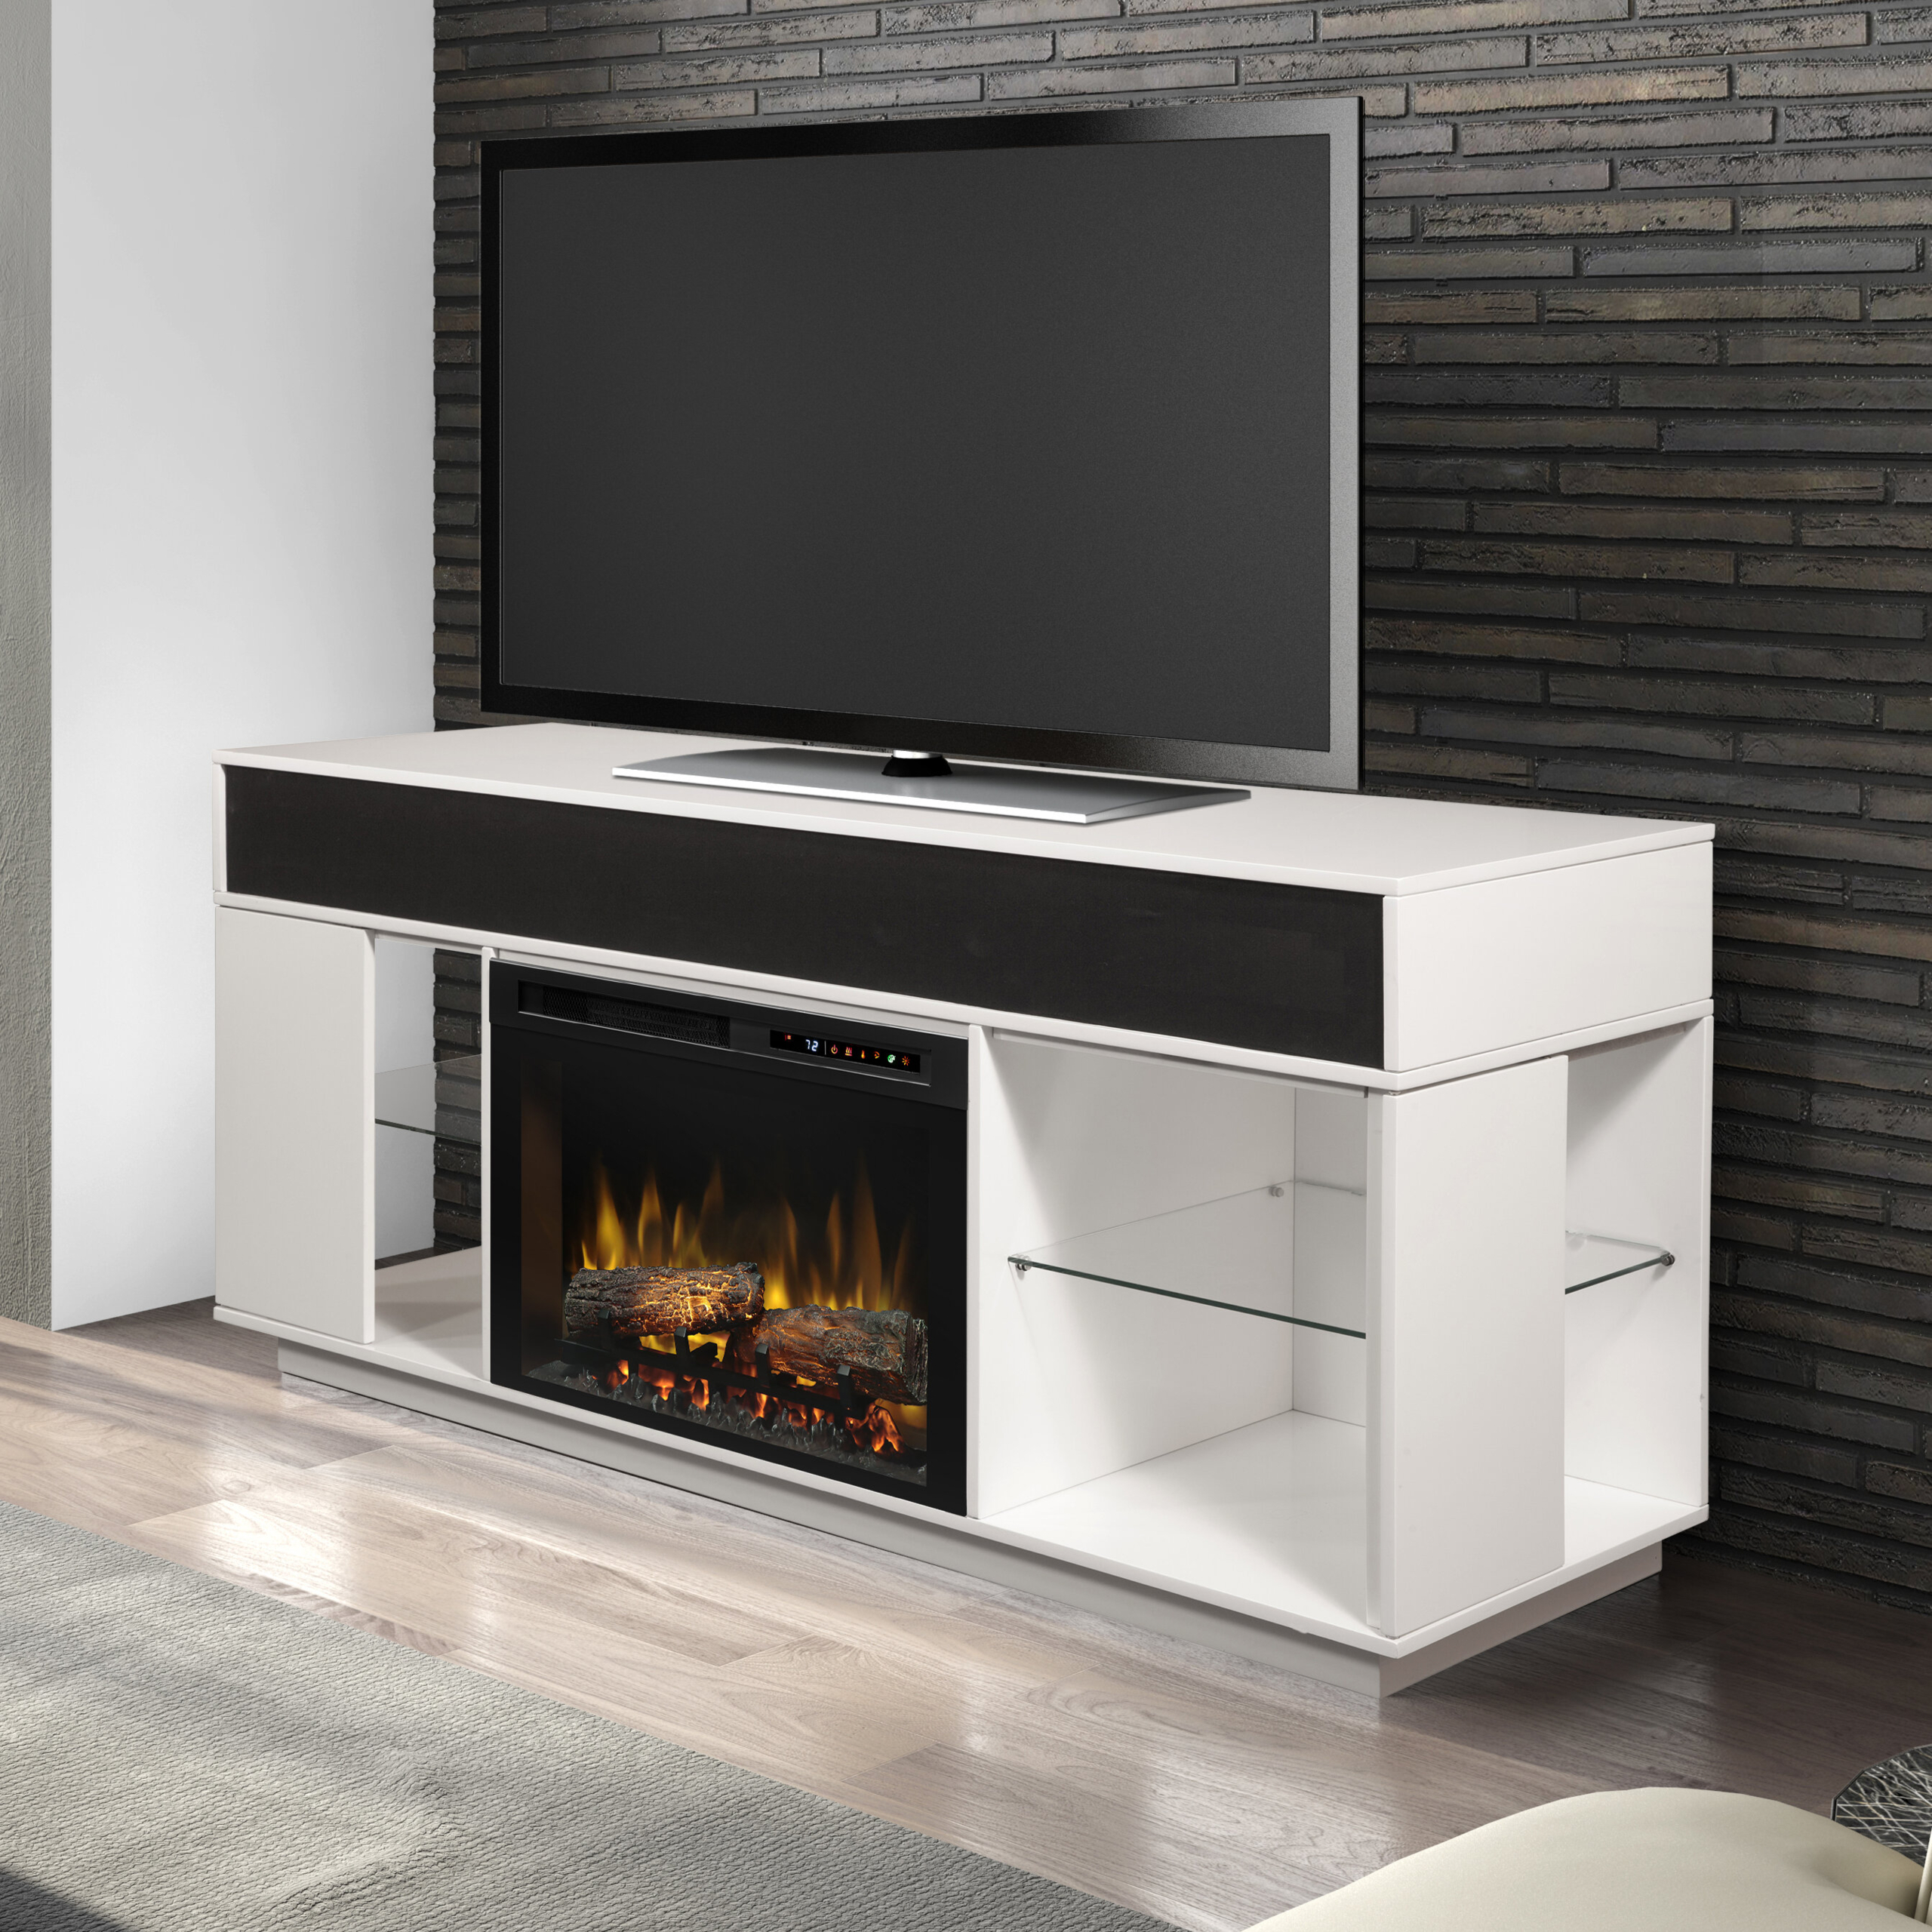 Sound TV Stand for TVs up to 60" with Fireplace Included